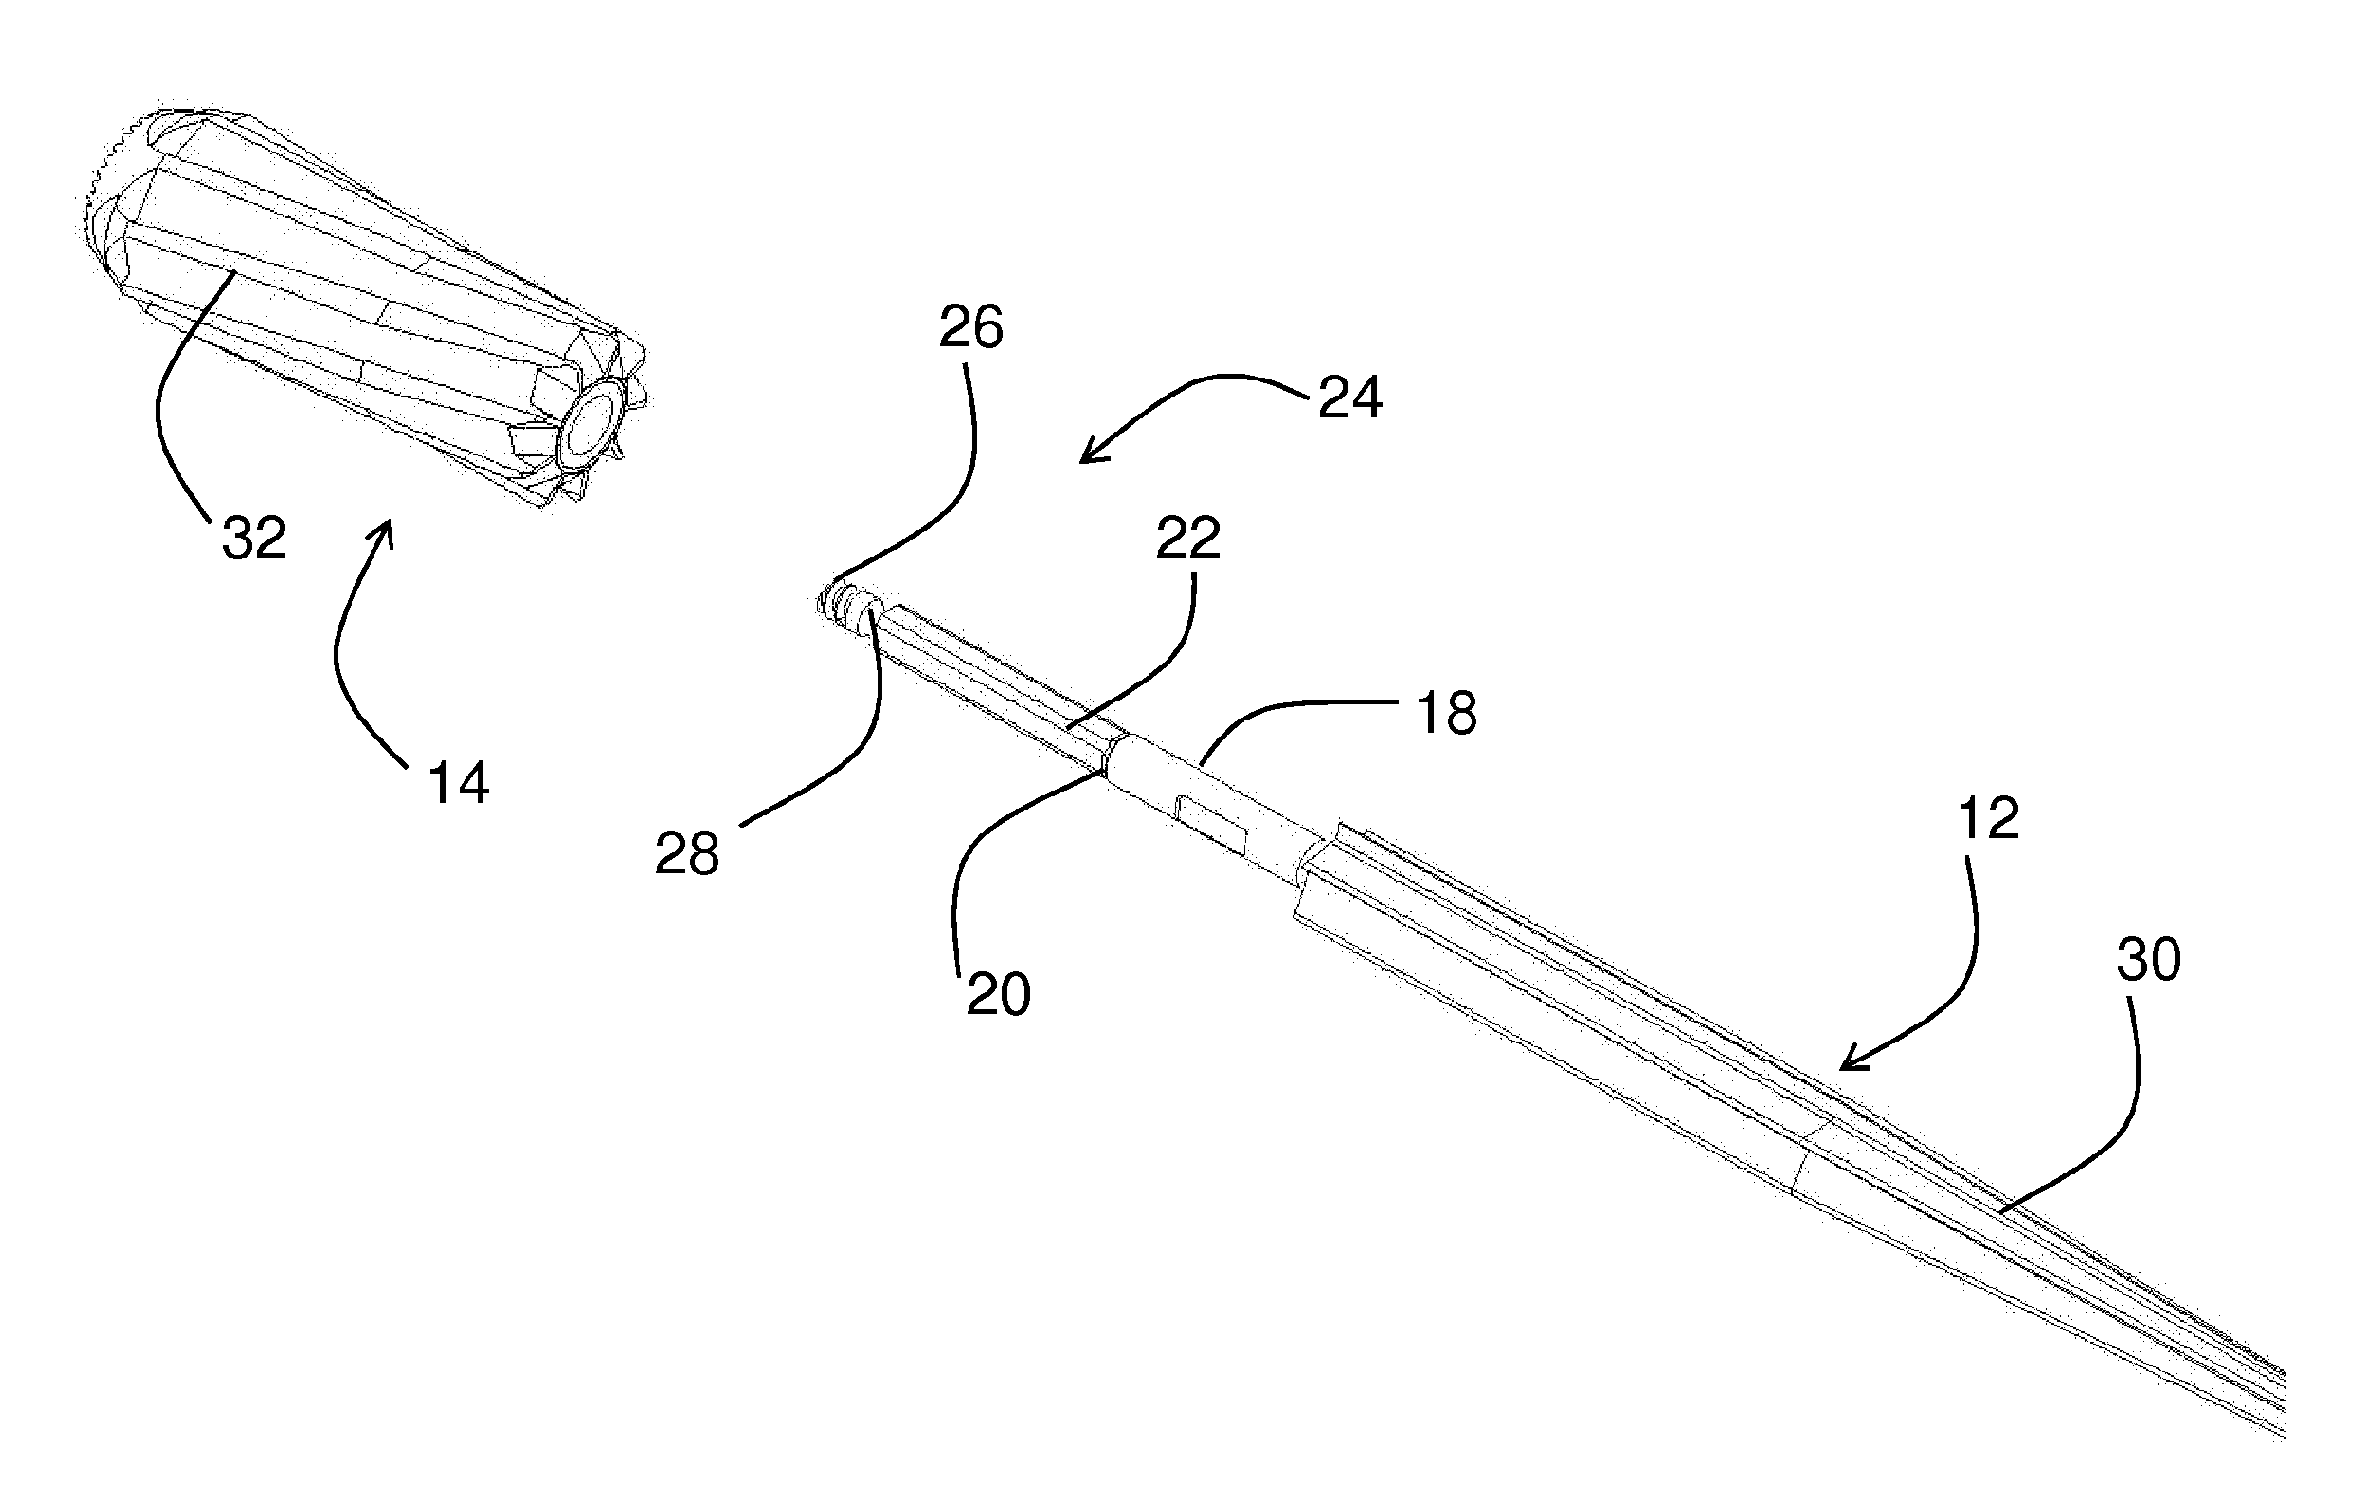 Femoral reaming system and method of performing trial reduction